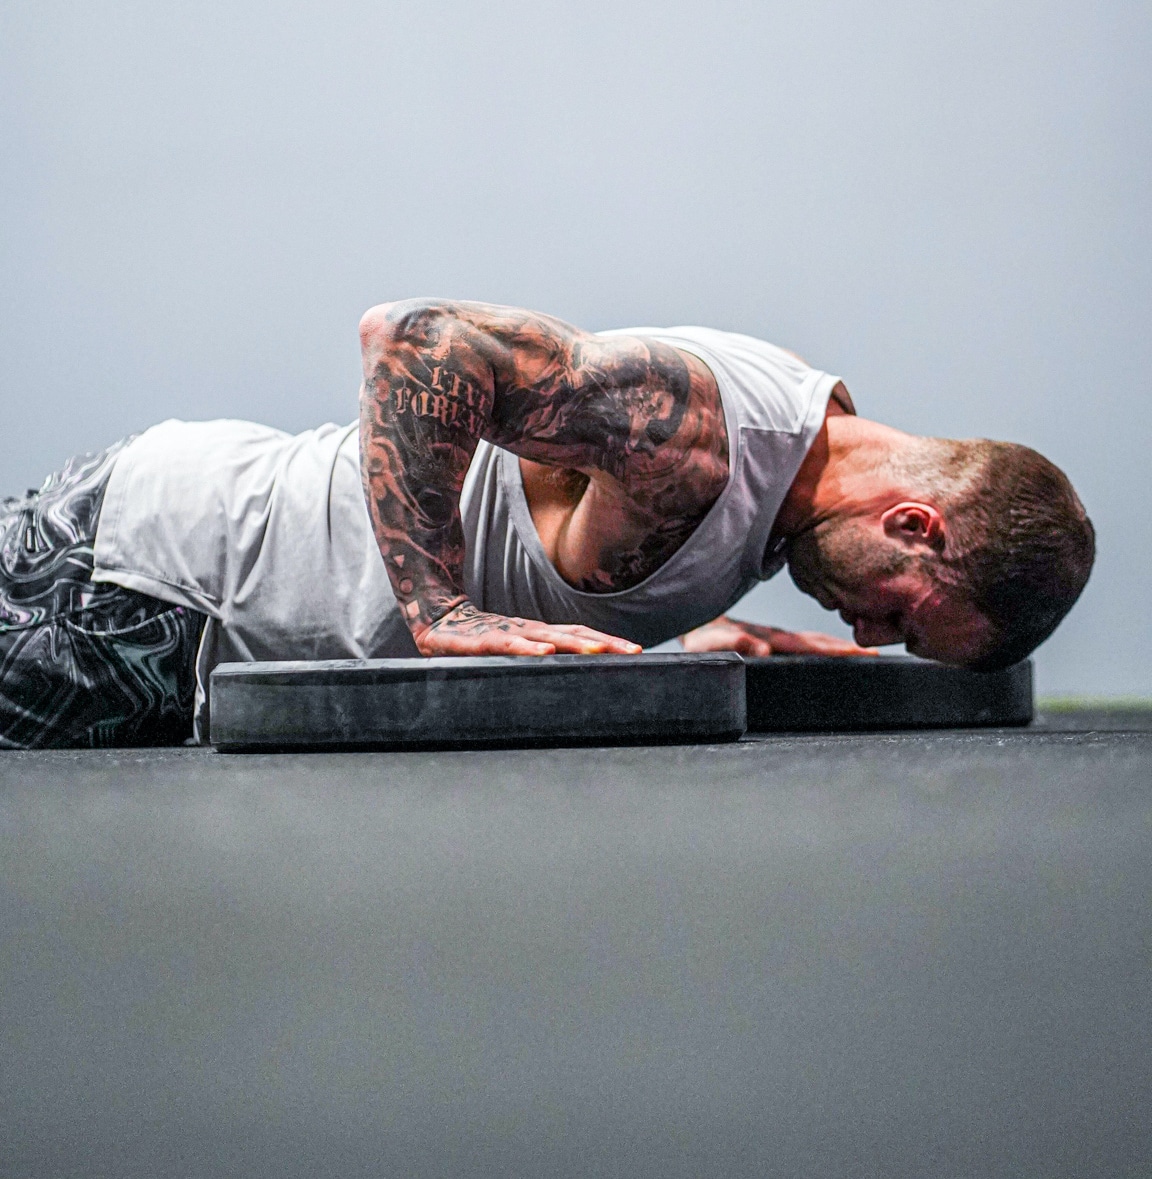 Ugly Mistakes You Shouldn't Make When Doing Pushups, Says Top